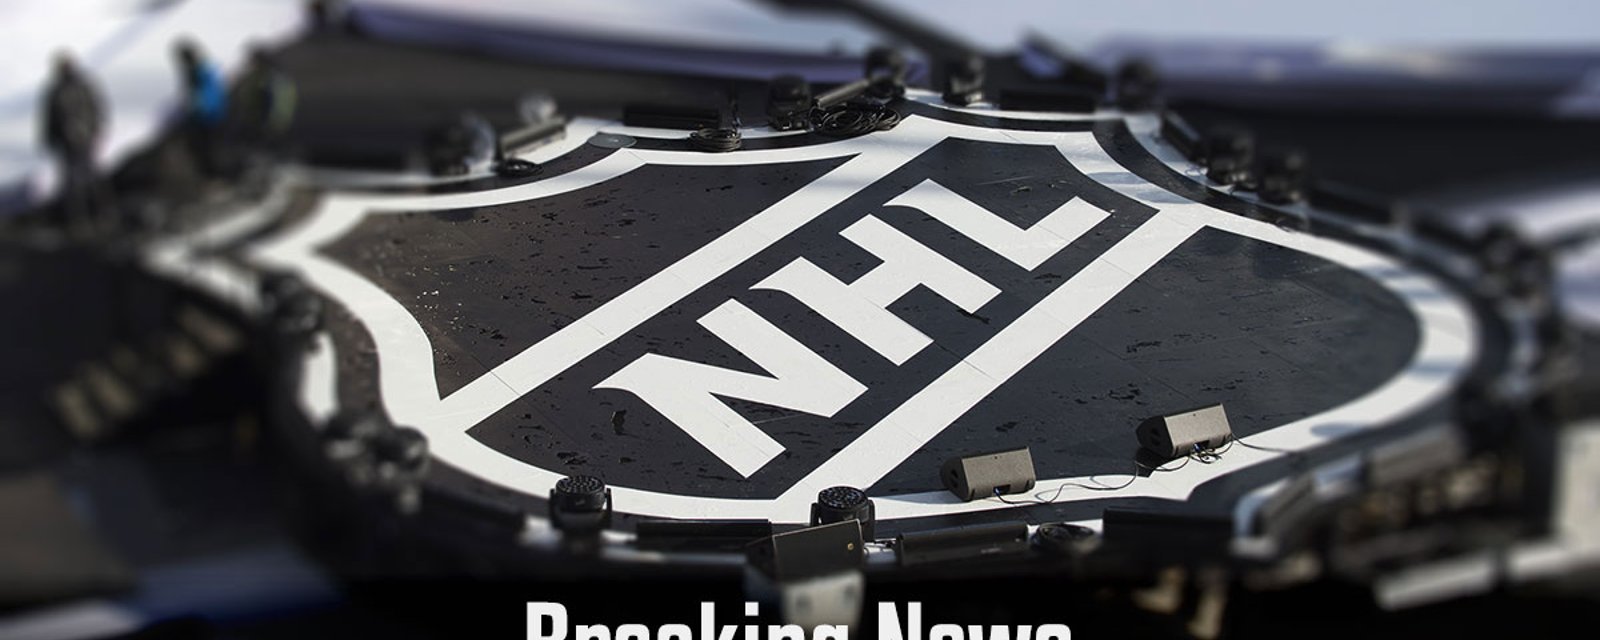 Breaking: NHL star and one other player busted for diving. 